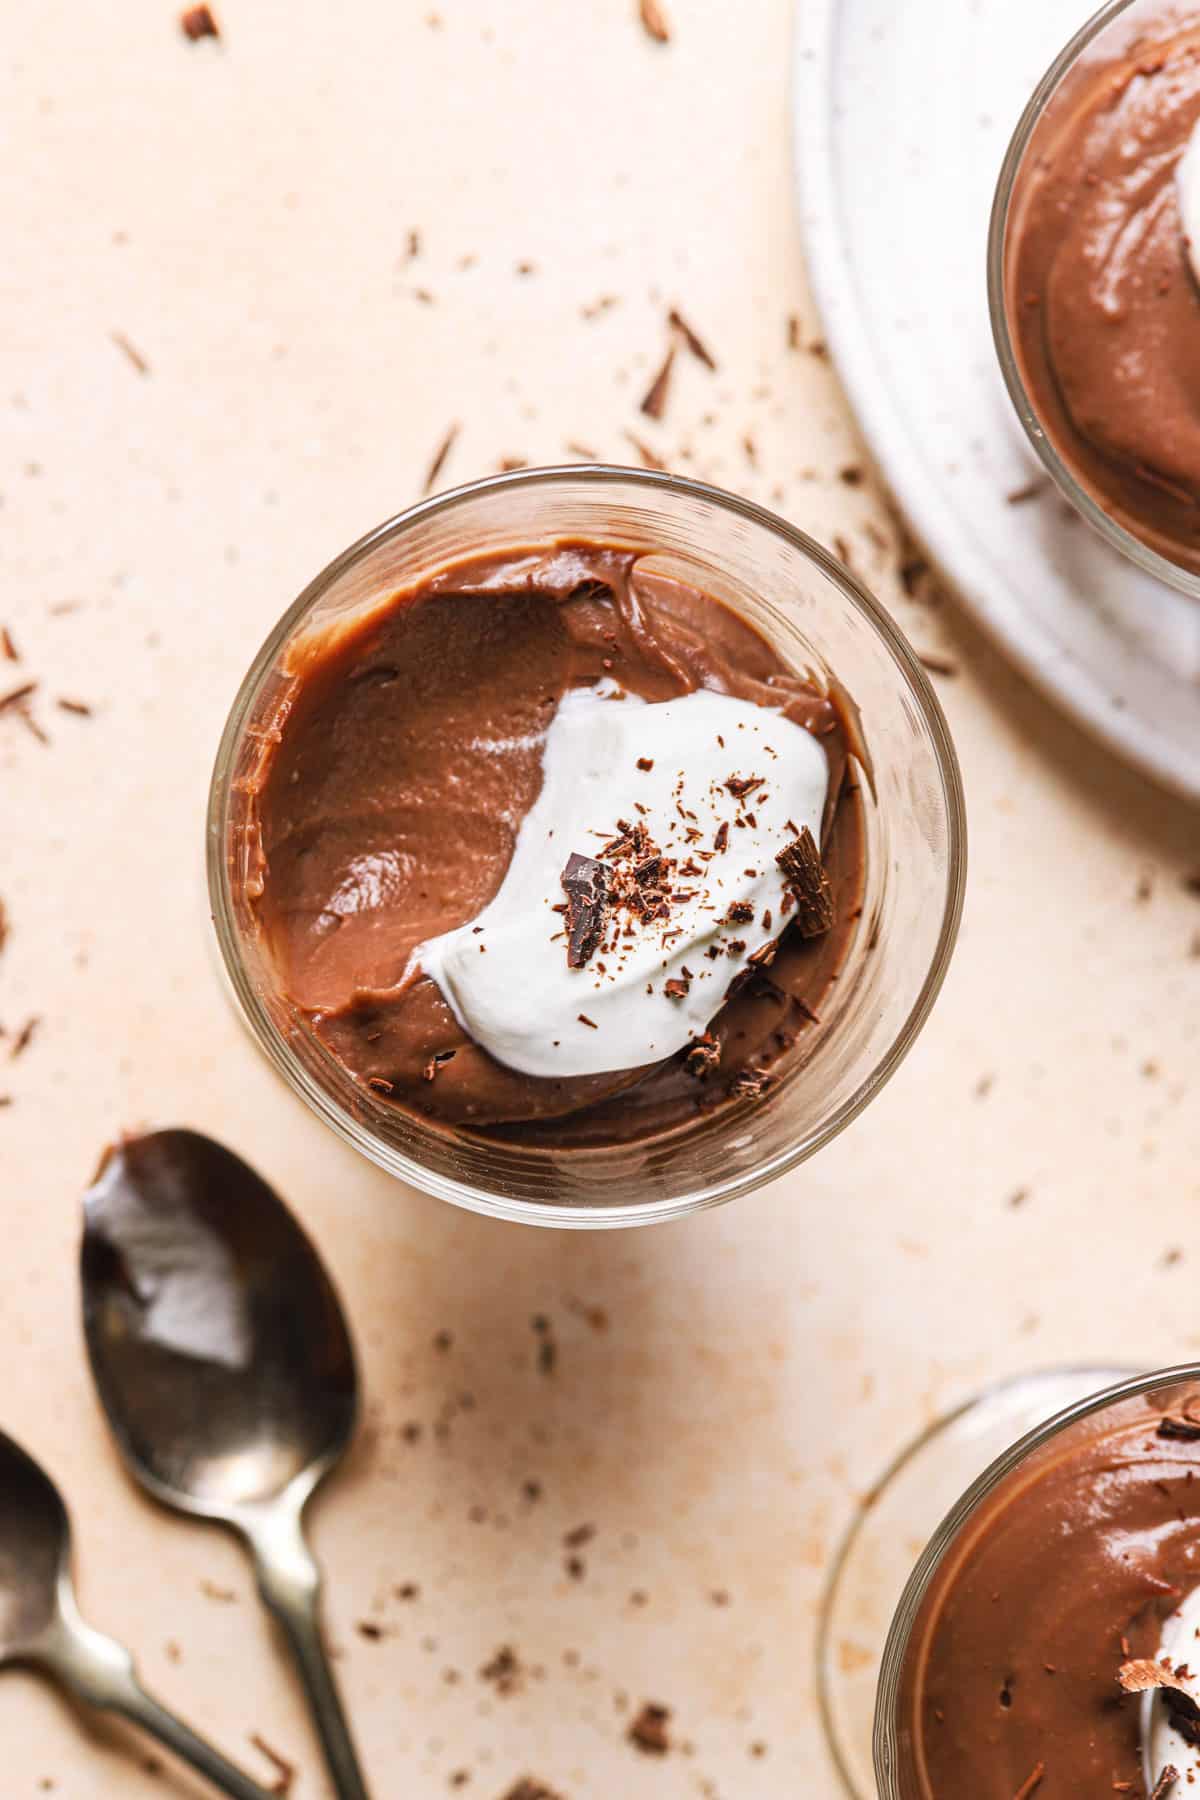 A top down photo of a glass of chocolate pudding with whipped cream and a scoop taken out of the left side of the cup.